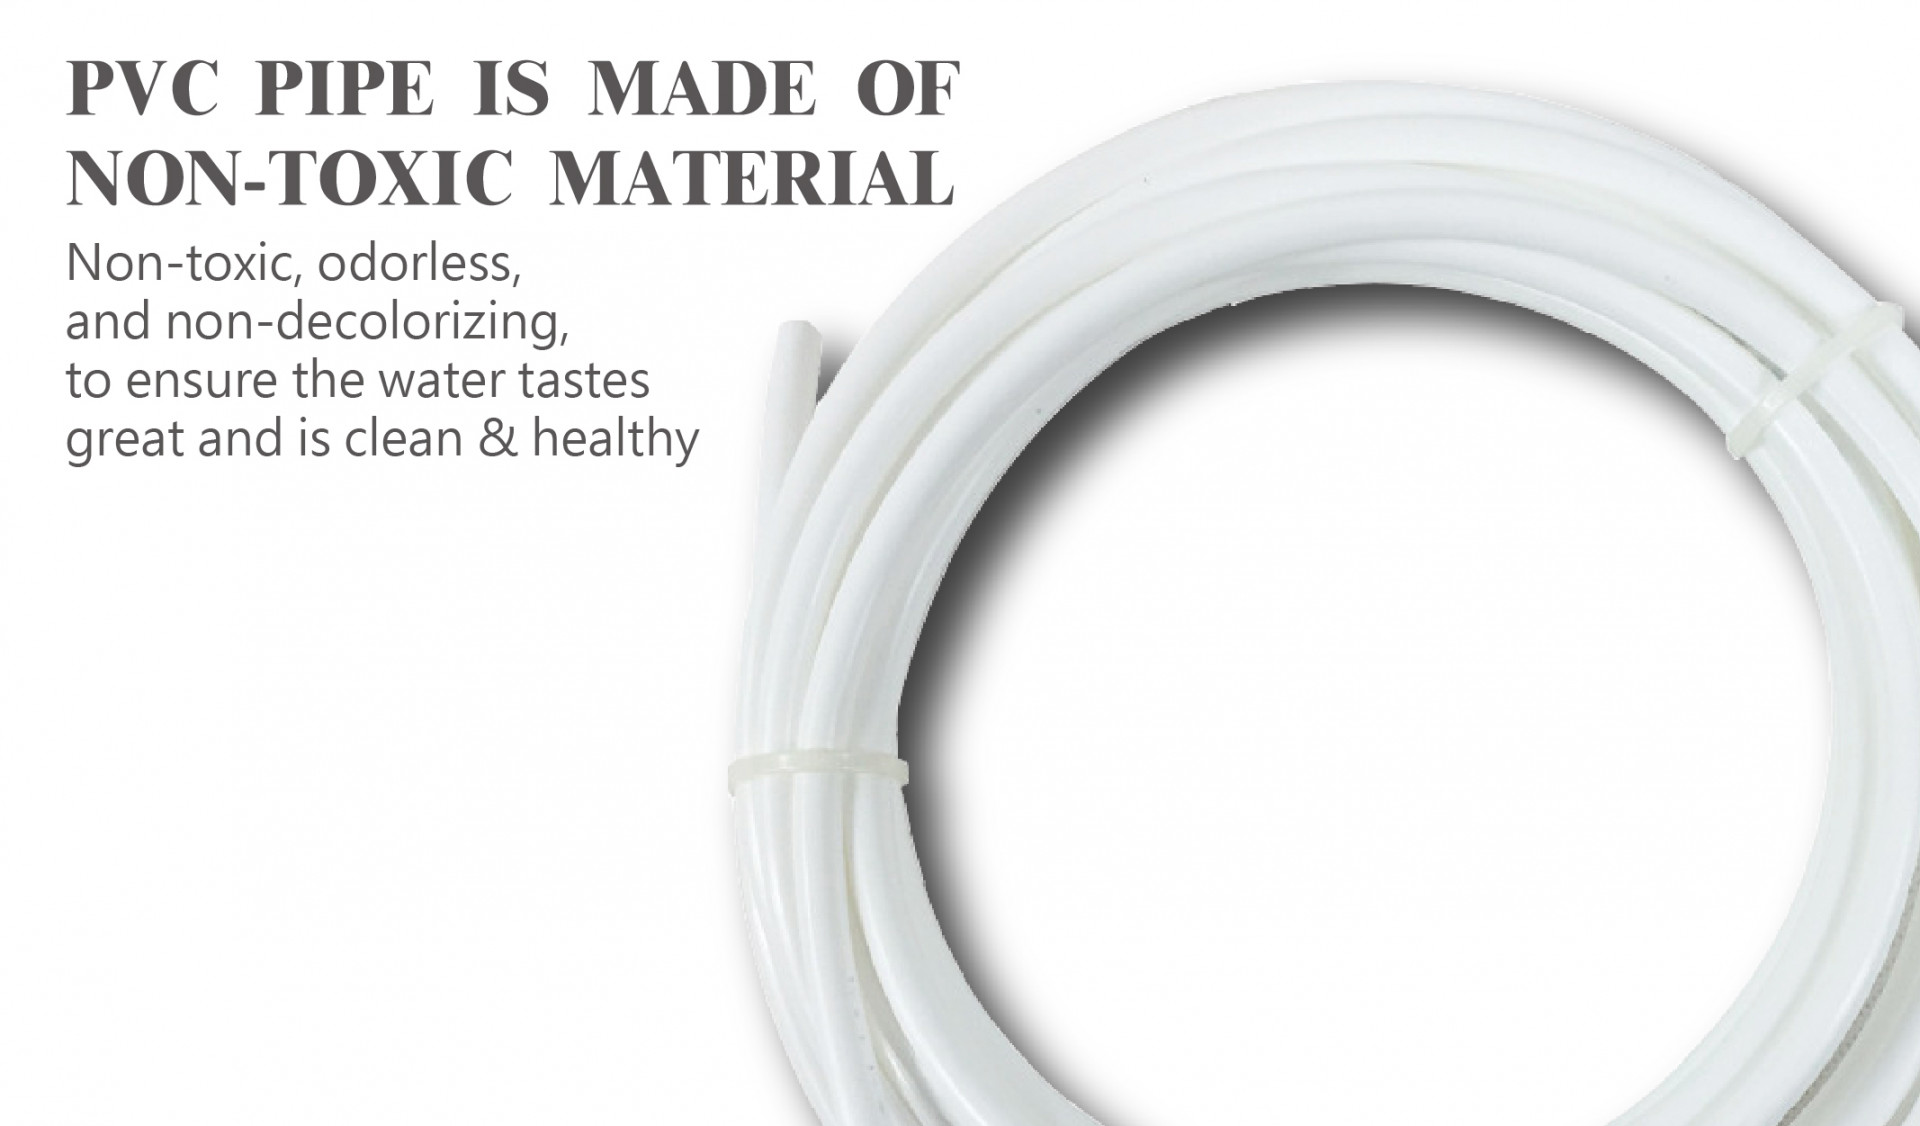 WATER PURIFIER PVC PIPE IS MADE OF NON-TOXIC MATERIAL